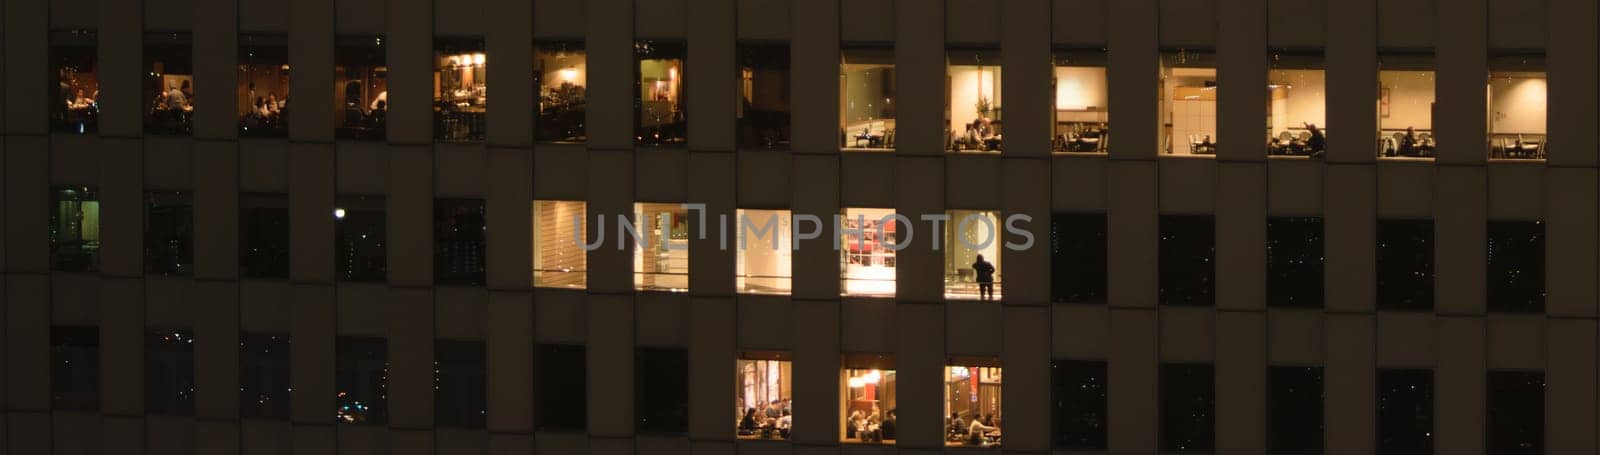 People busy in a skyscraper at night by jameshumble